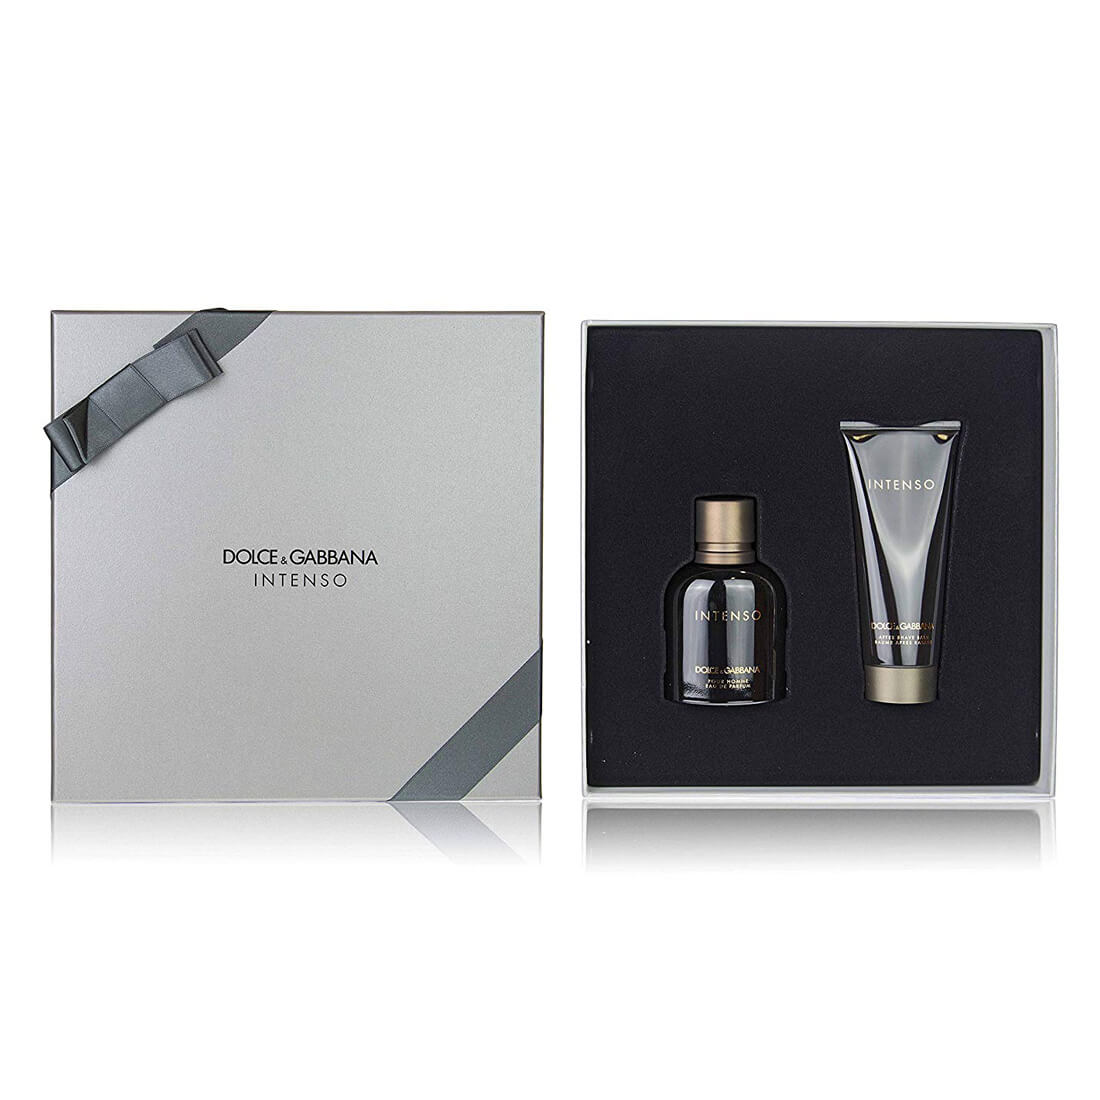 Dolce & Gabbana Intenso Pour Homme Gift Set